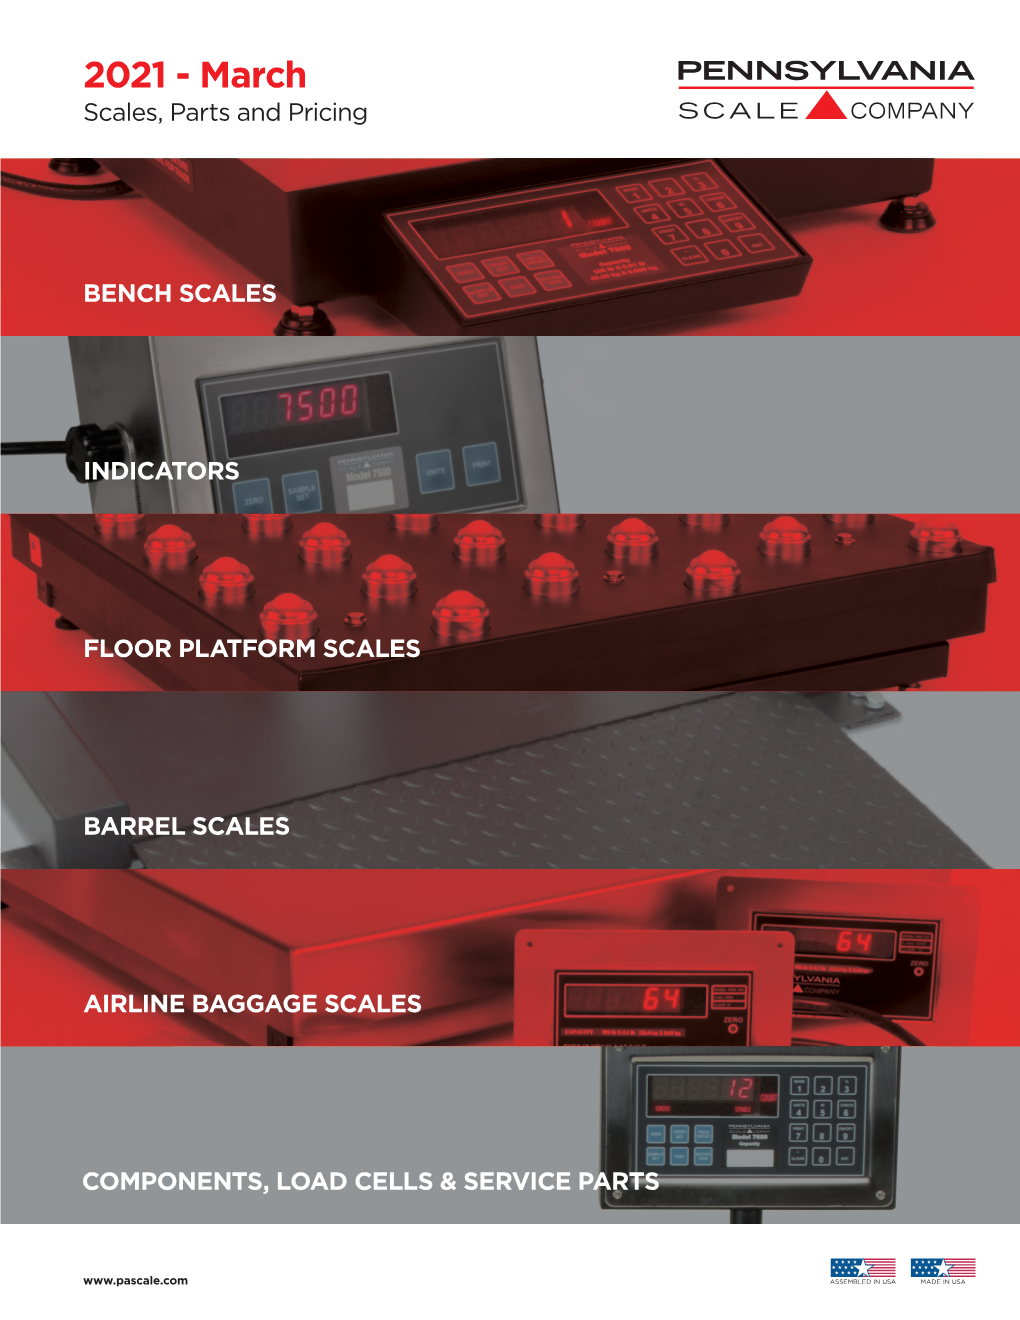 2021 - March Scales, Parts and Pricing